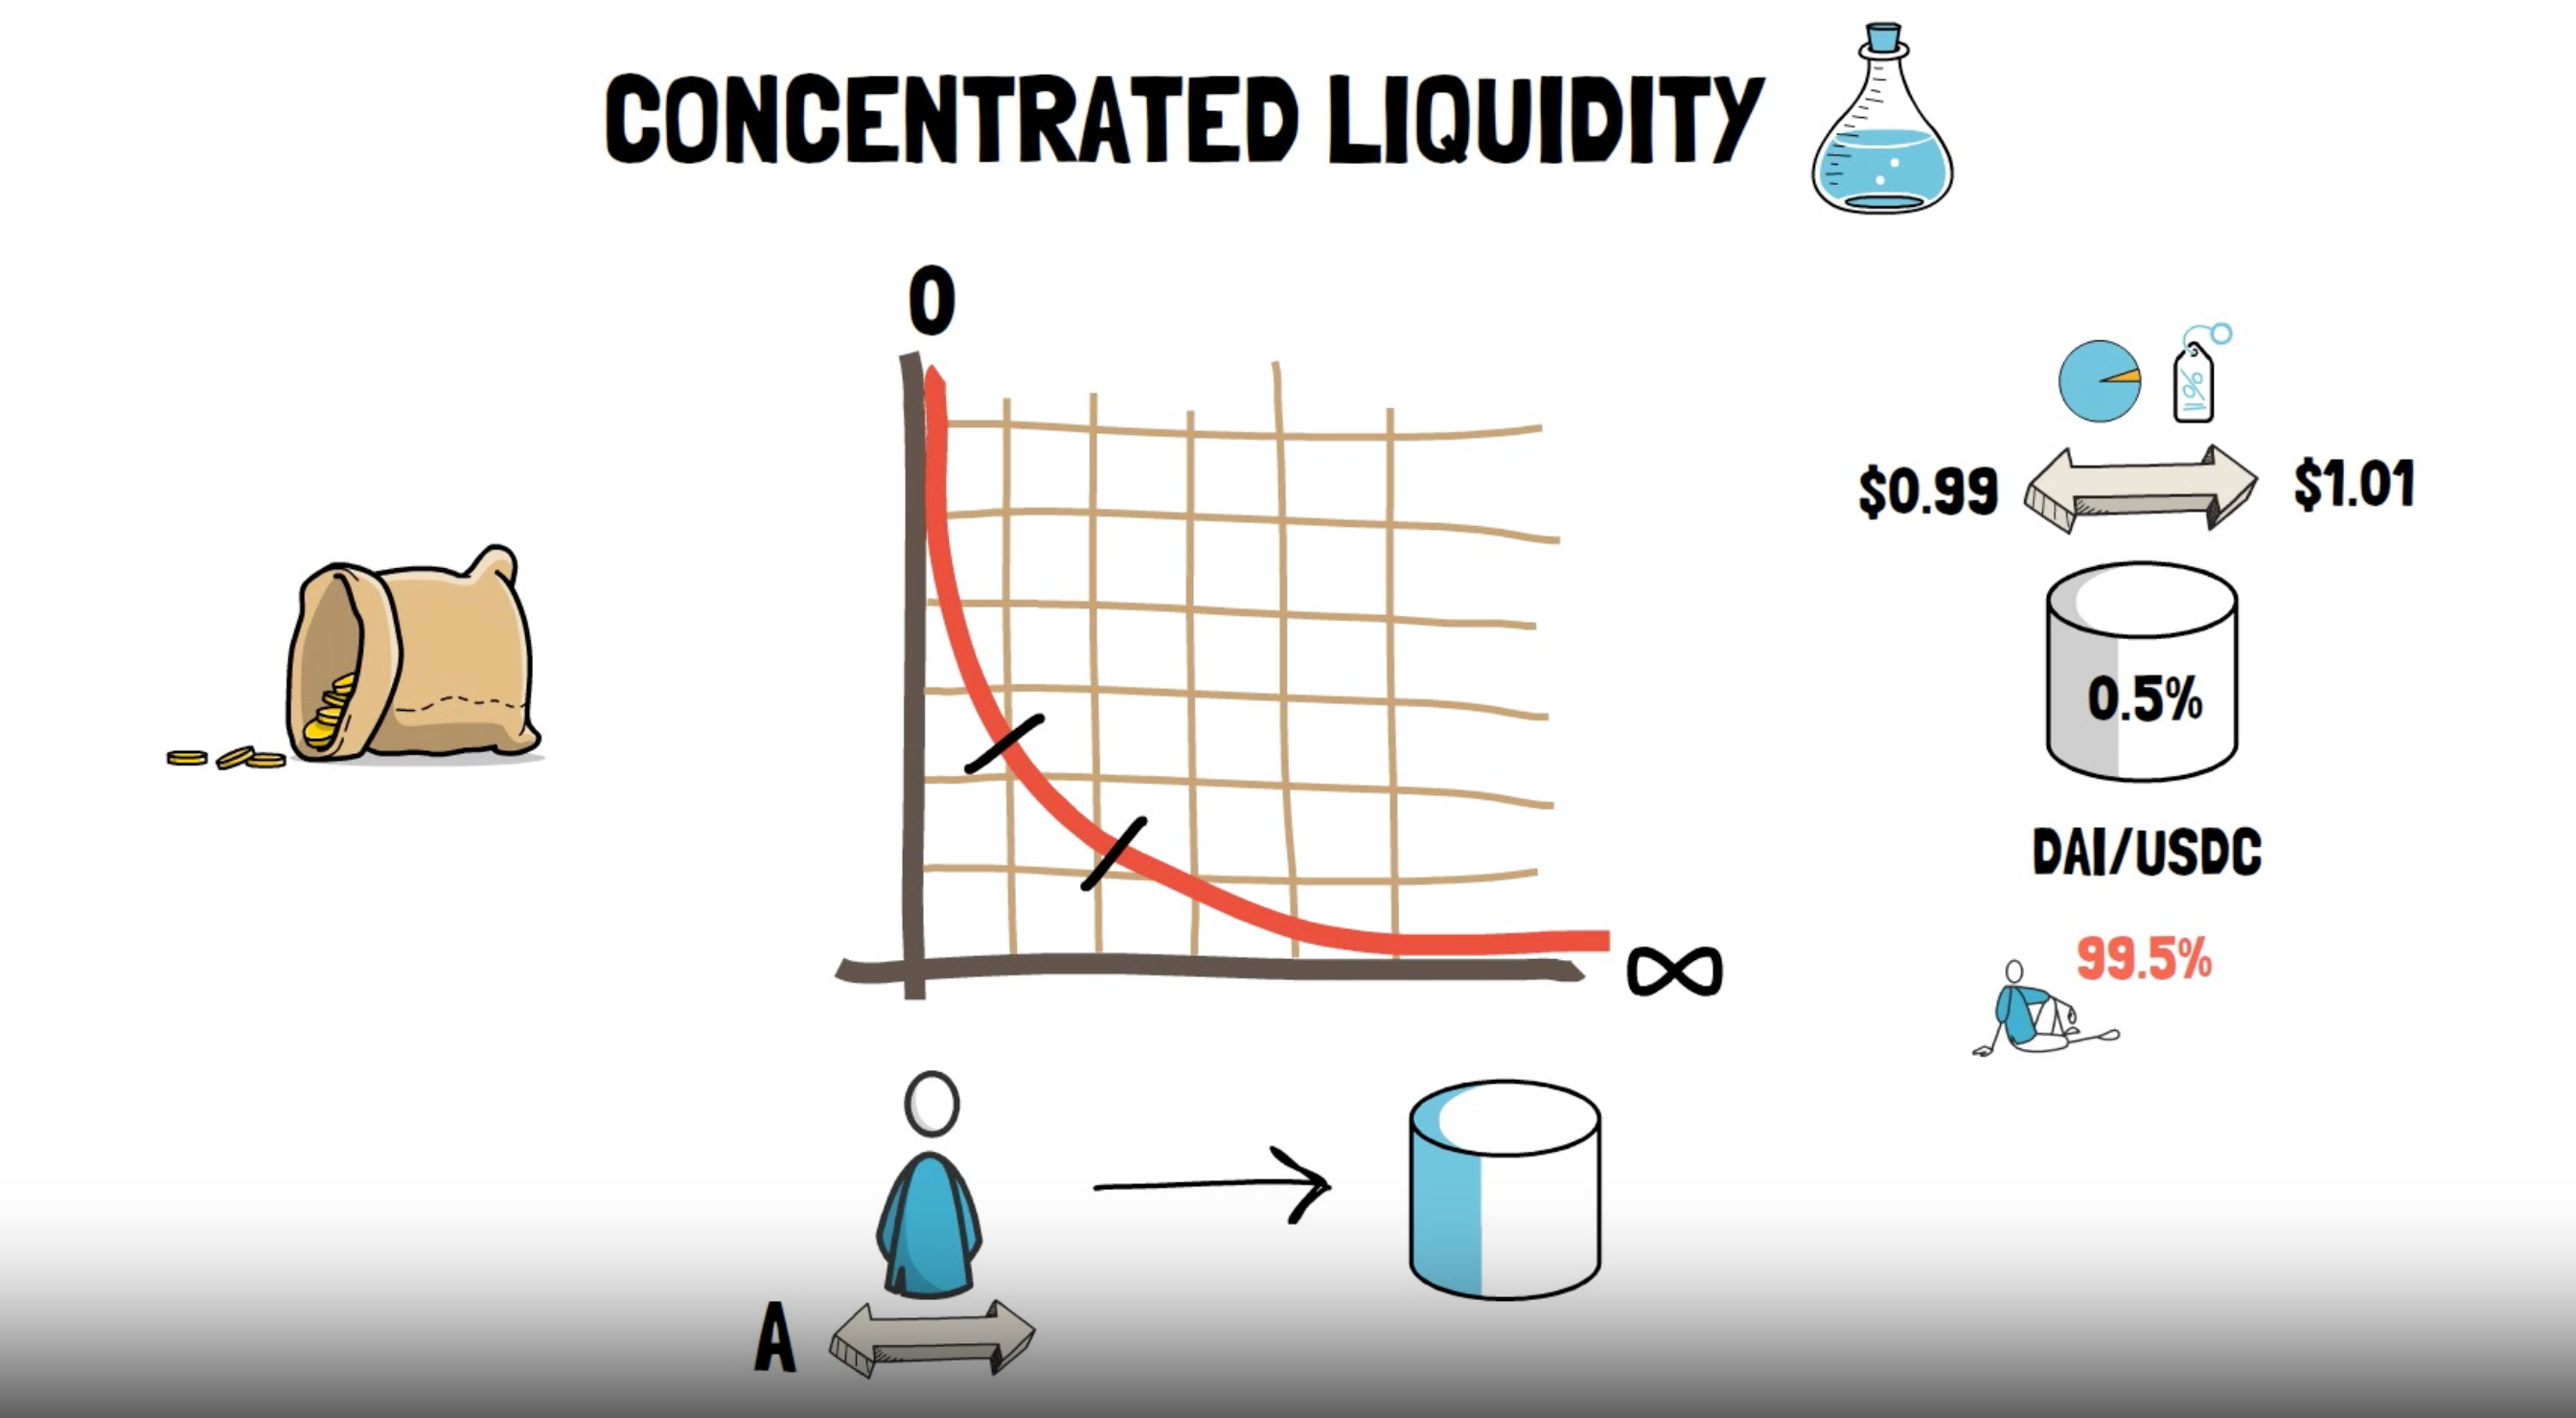 A graphical depiction of concentrated liquidity on the Uniswap protocol.